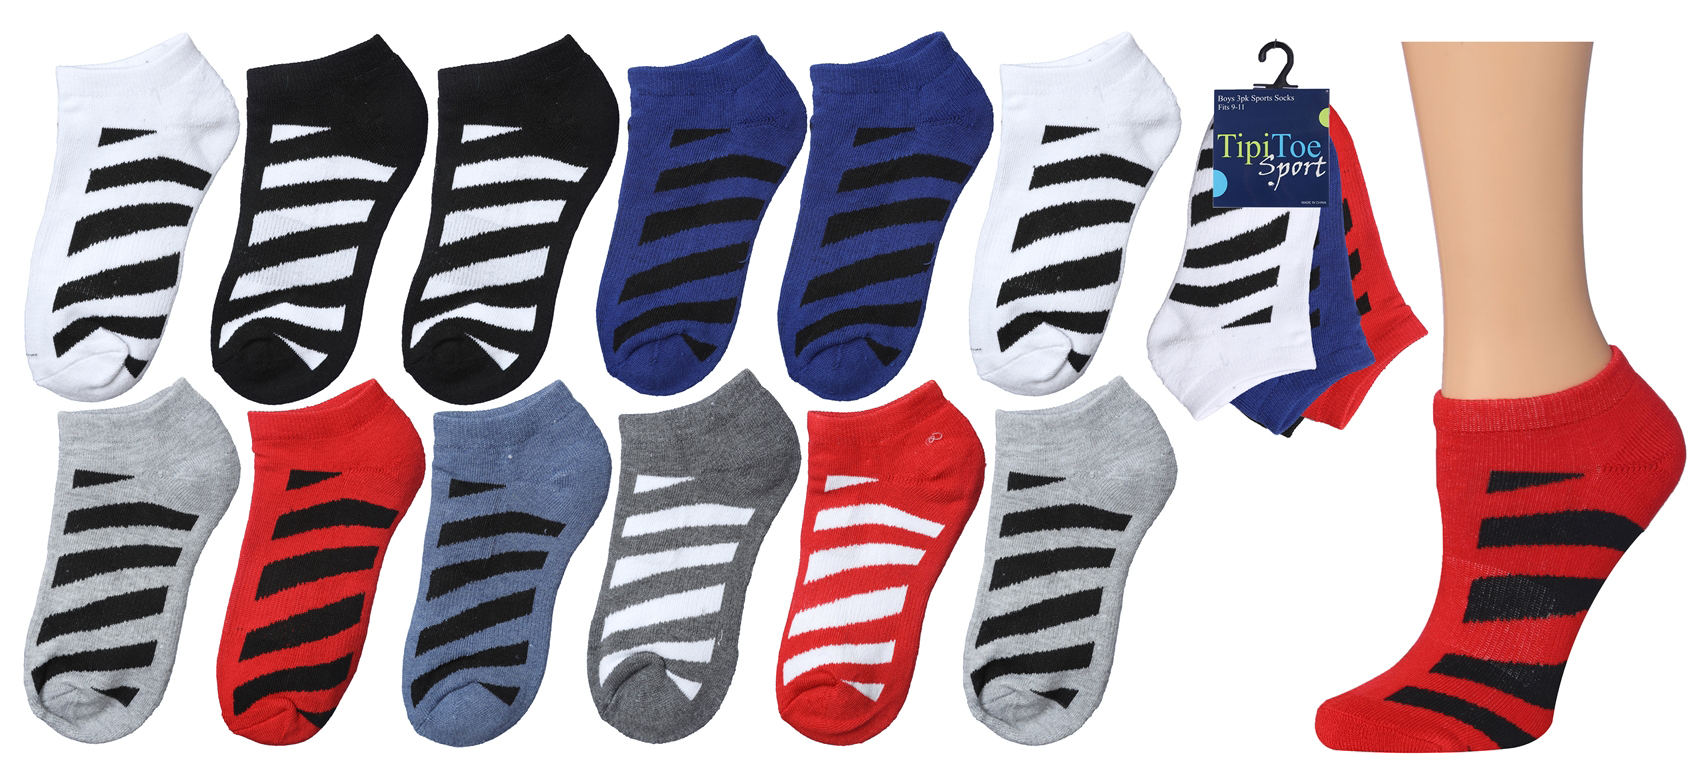 Teen Boy's/Women's Cushioned Low Cut SOCKS w/ Arch Support - Striped Prints - Size 9-11 - 3-Pair Pac